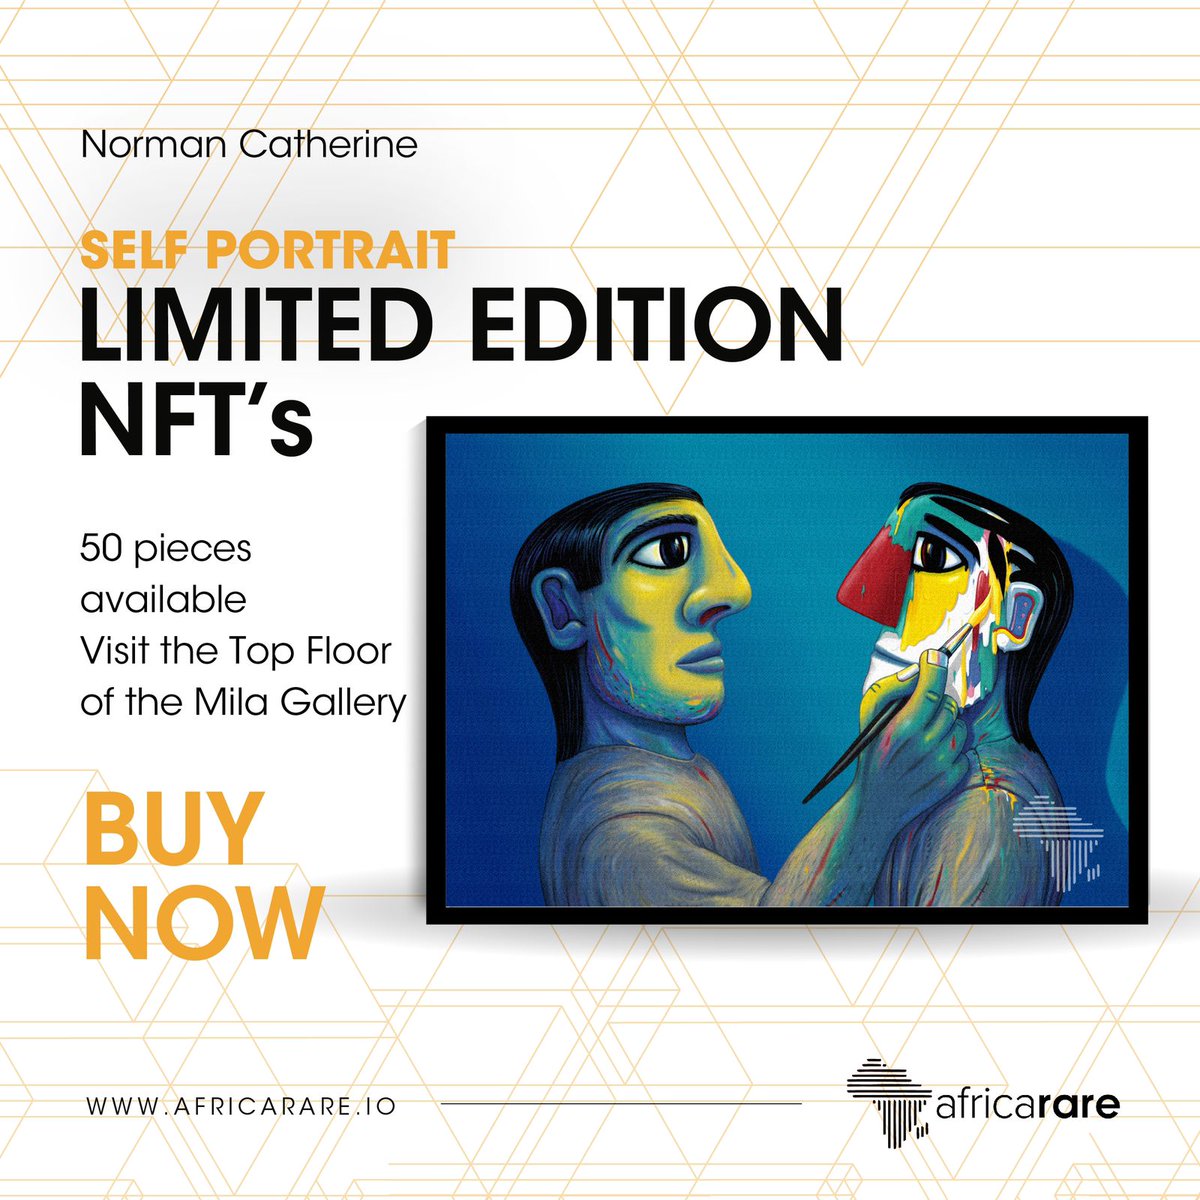 #AD The Norman Catherine 'Self Portrait' NFT is available just for 50 pieces at 0.2ETH, A bargain. Owning this piece will give you OG status, free airdrops & more.Visit the Mila Gallery on africarare.io 
#ubuntuland #metaverse #futureproofAfrica
@AfricarareNft